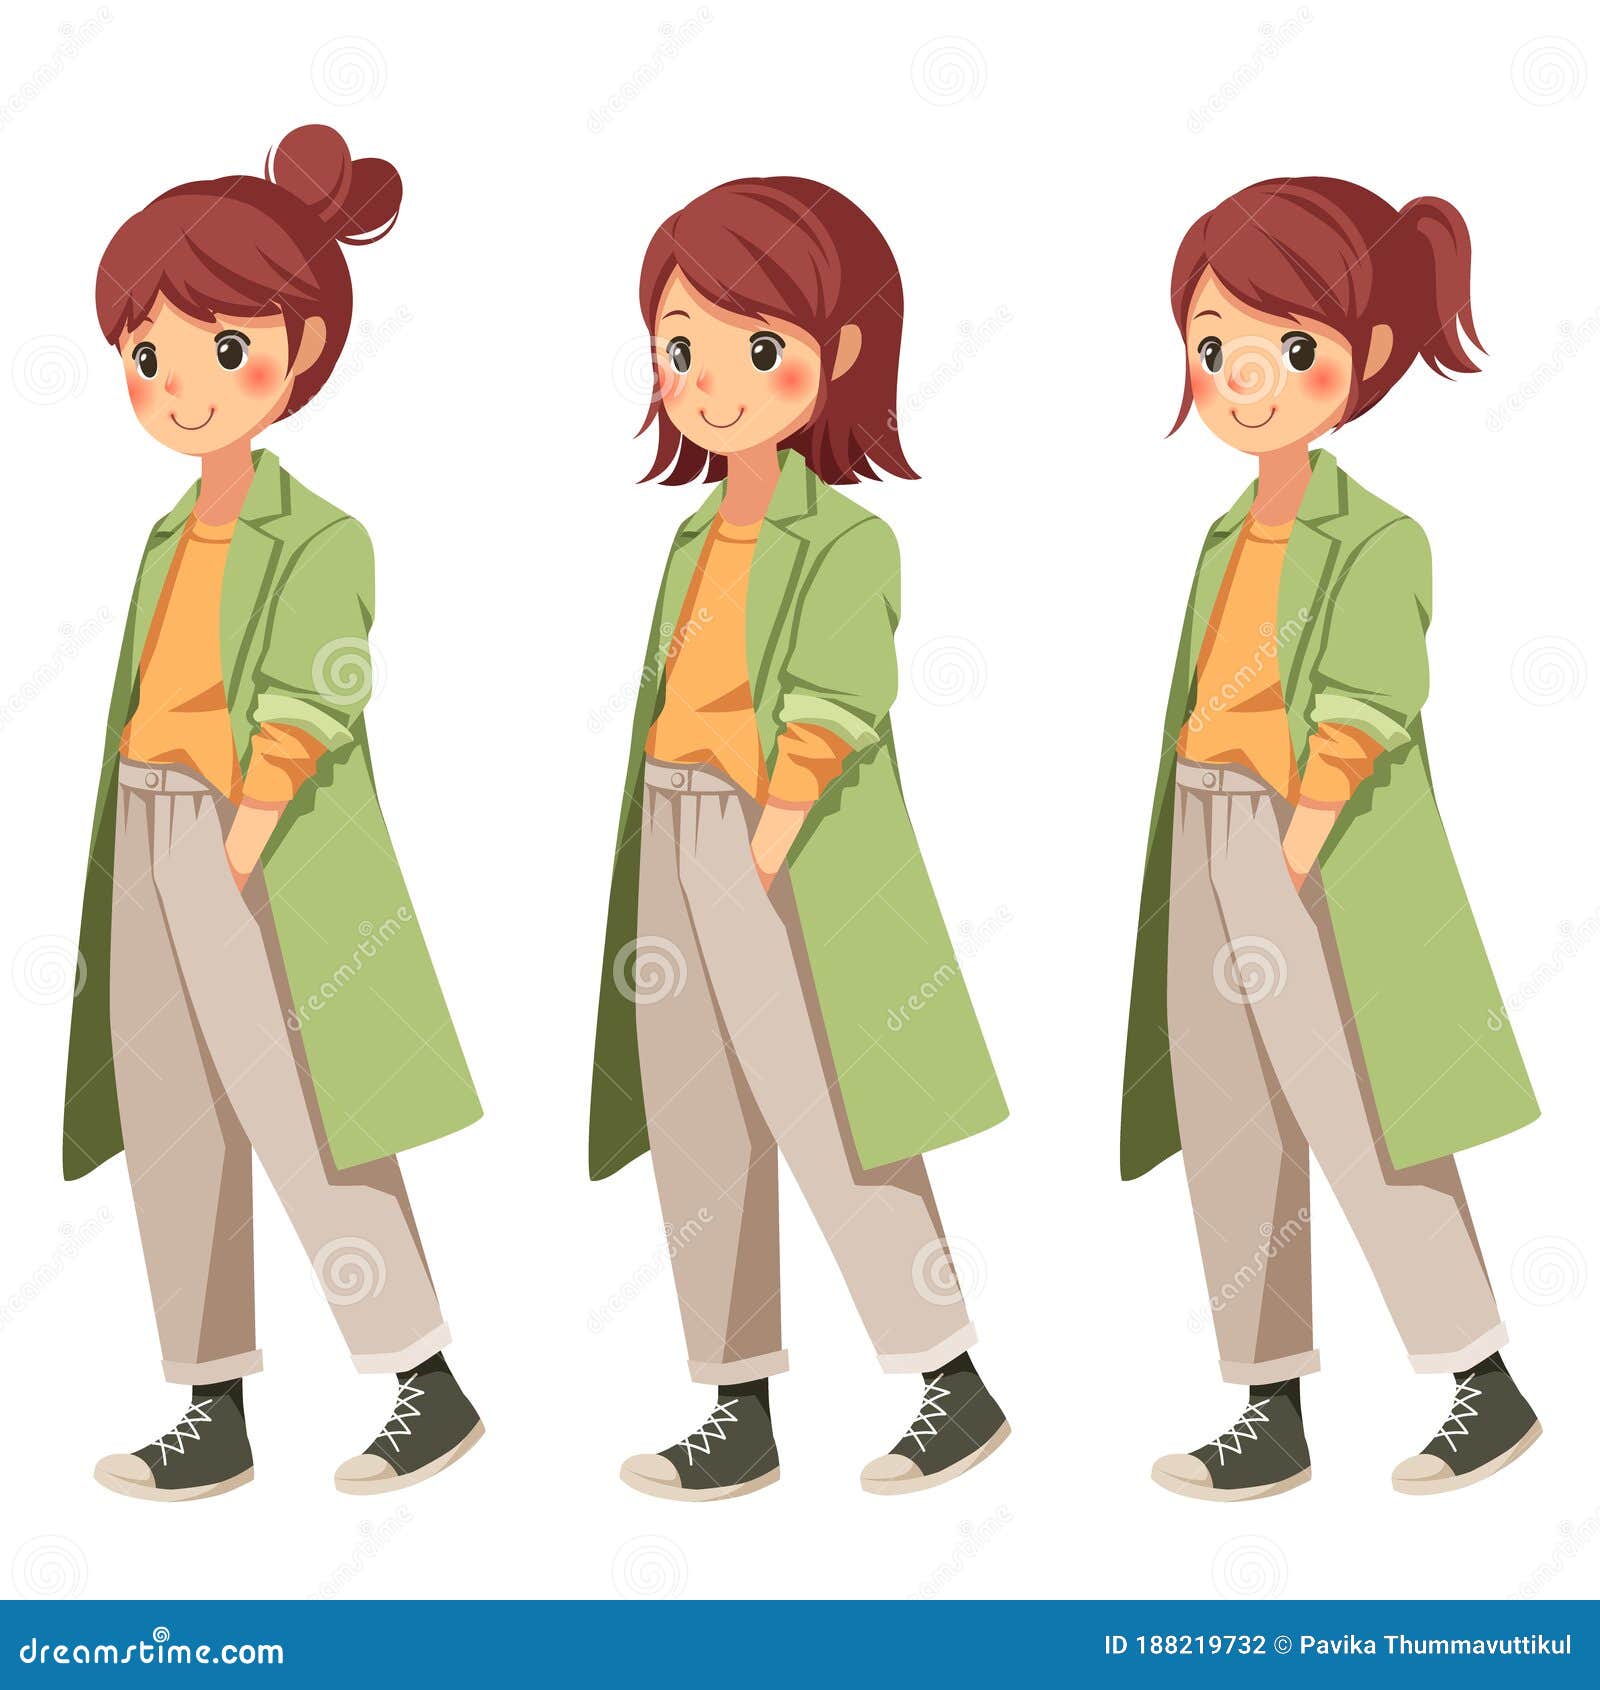 Character Cartoon Women Wearing Yellow Jackets, Green Coats and  Cream-colored Pants Stock Vector - Illustration of cute, fashion: 188219732